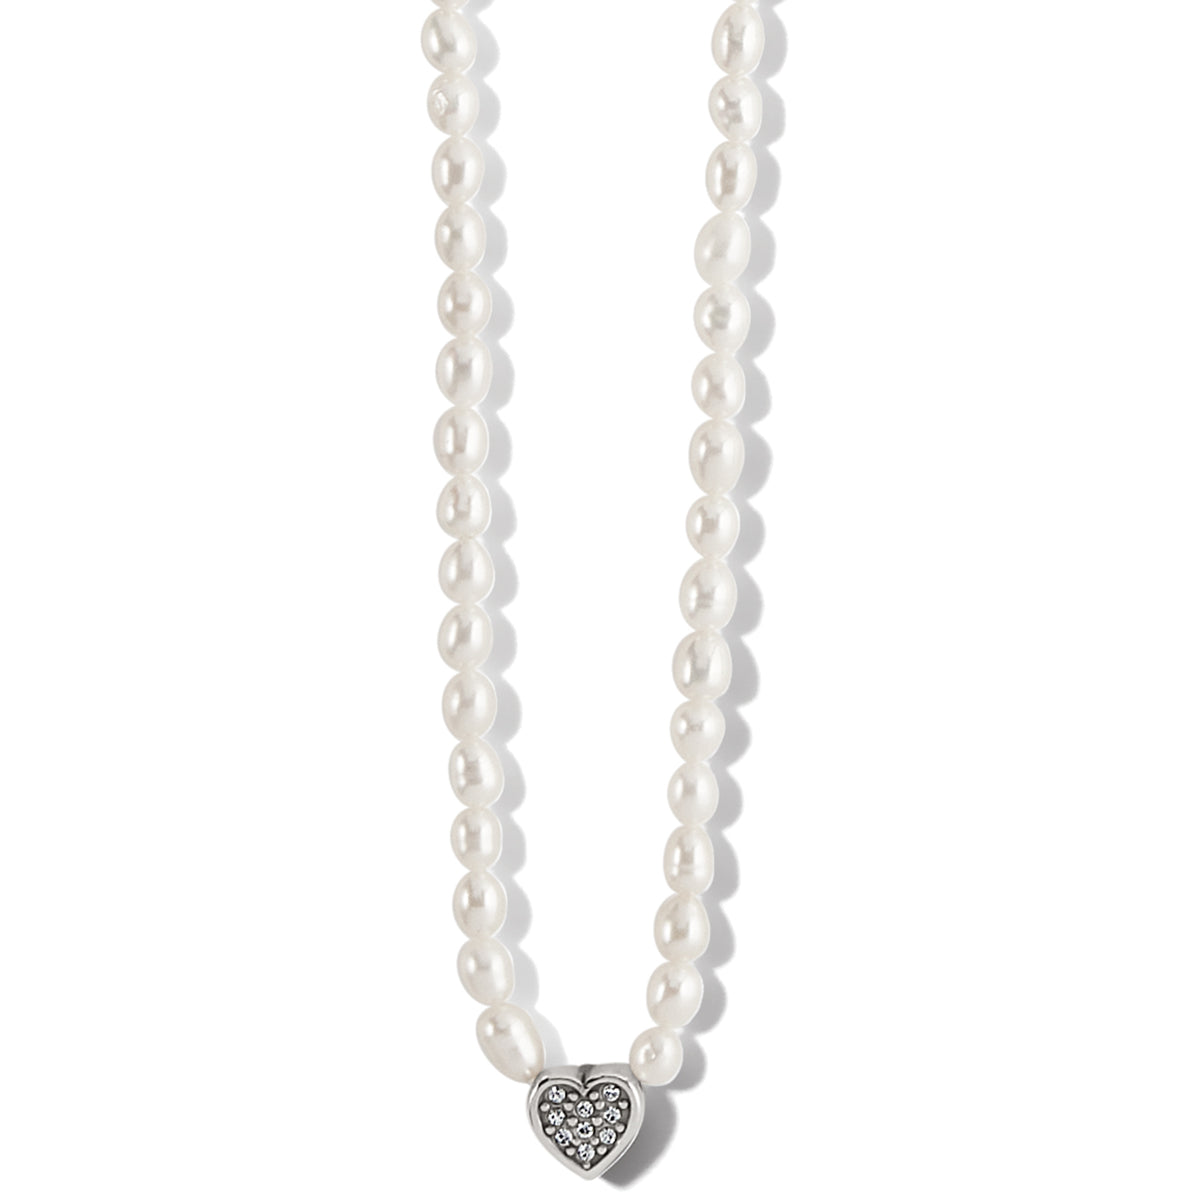 Meridian Zenith Heart Pearl Necklace - Image 1 - Brighton